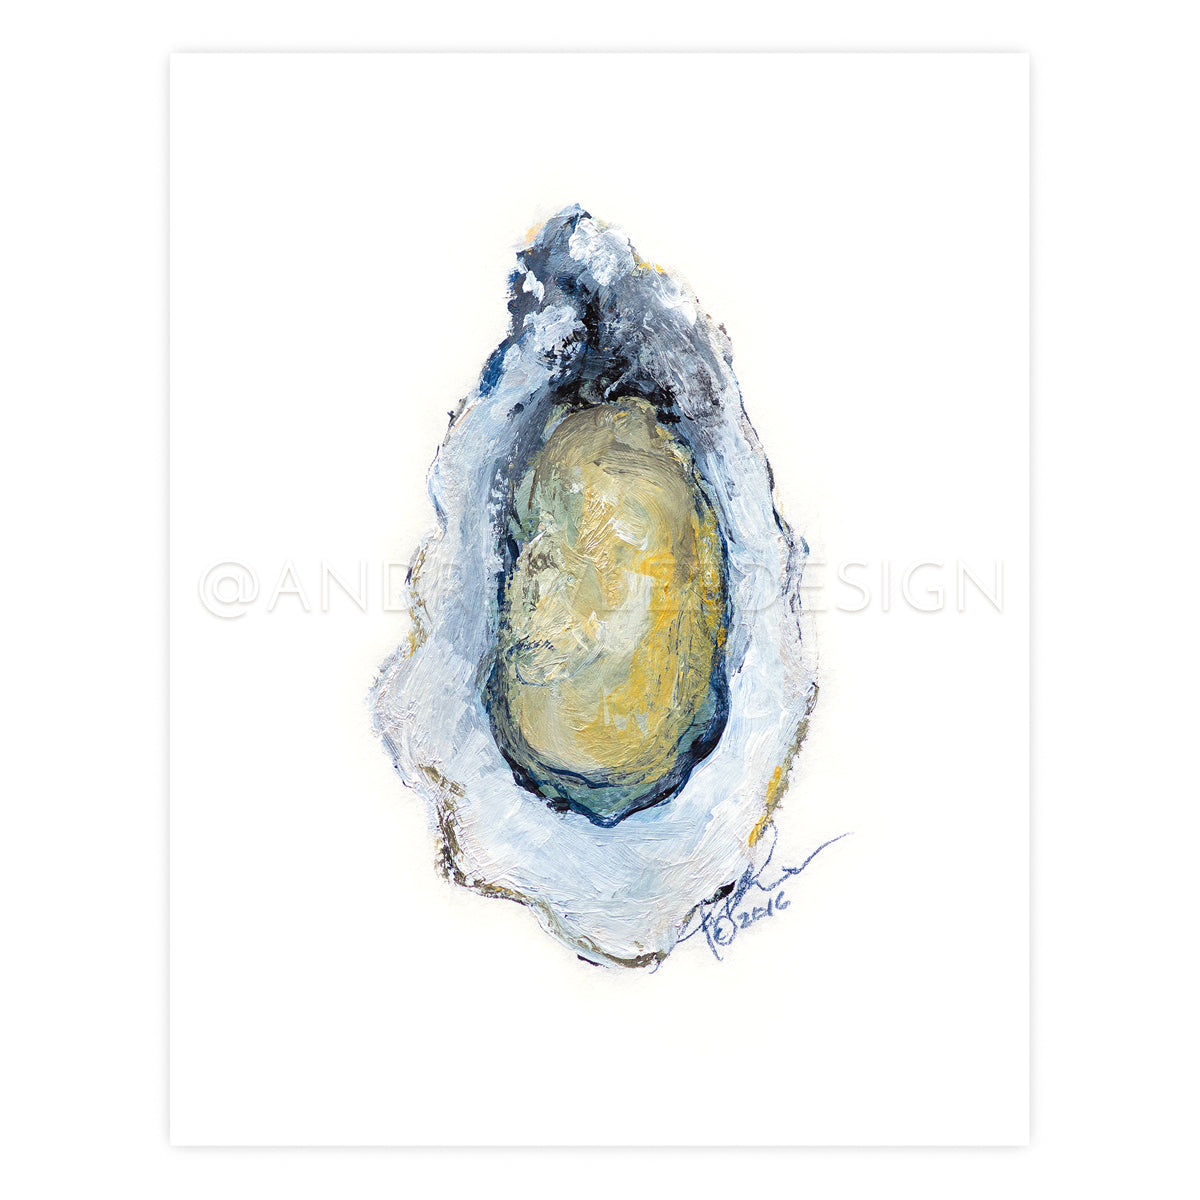 Oyster in iridescents, 11x14" Print